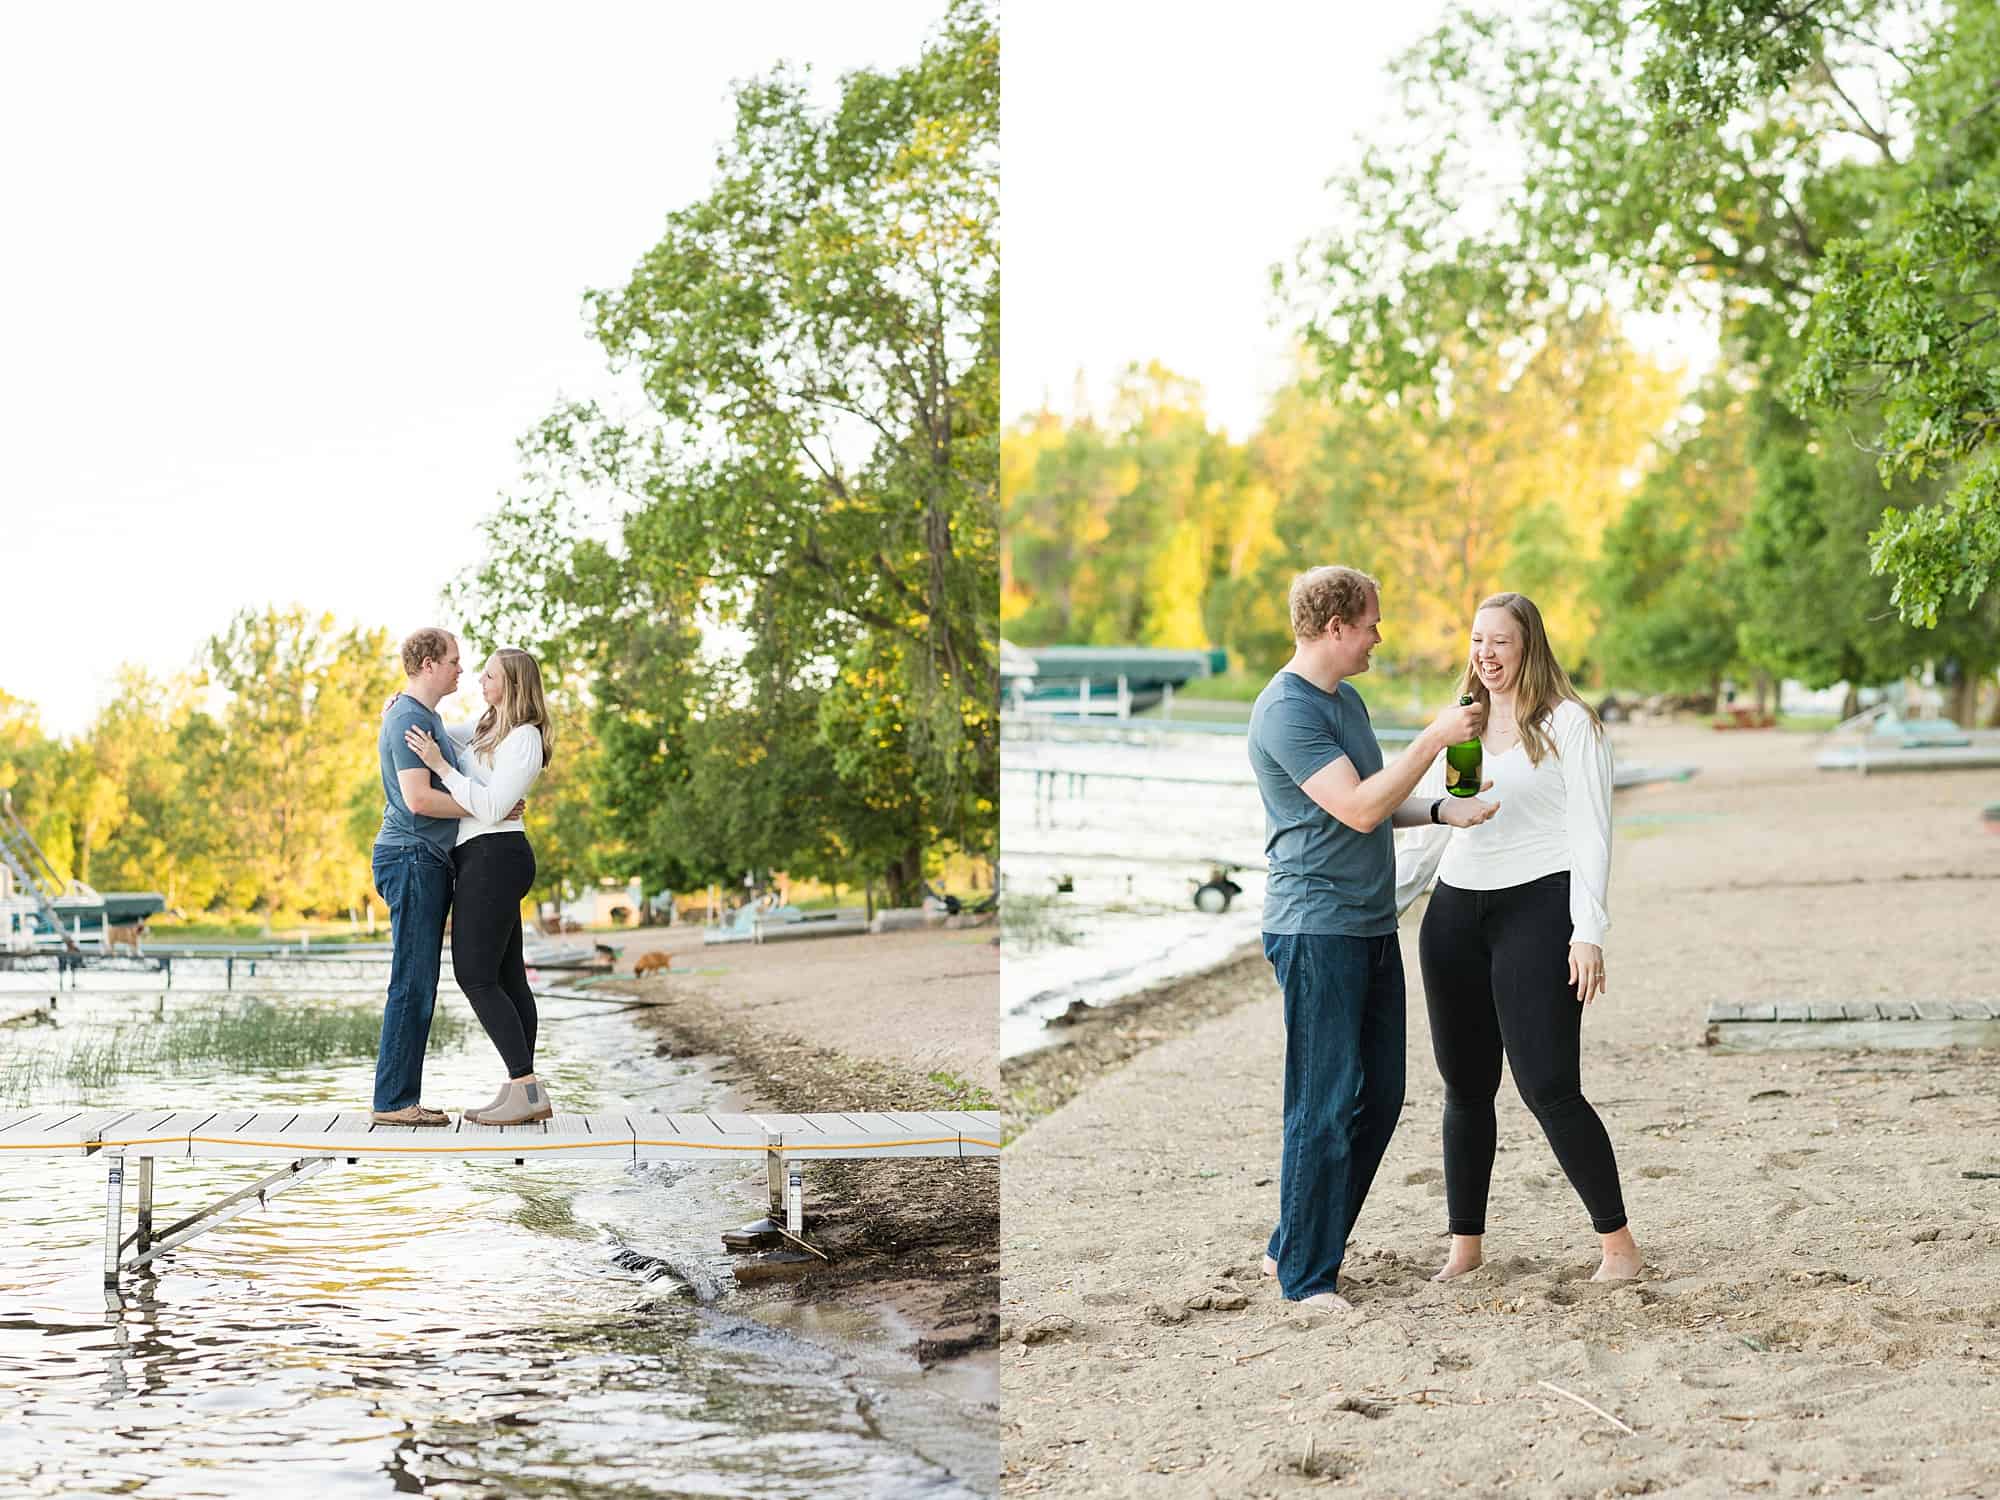 An engaged couple celebrate their engagement along the lake during sunset